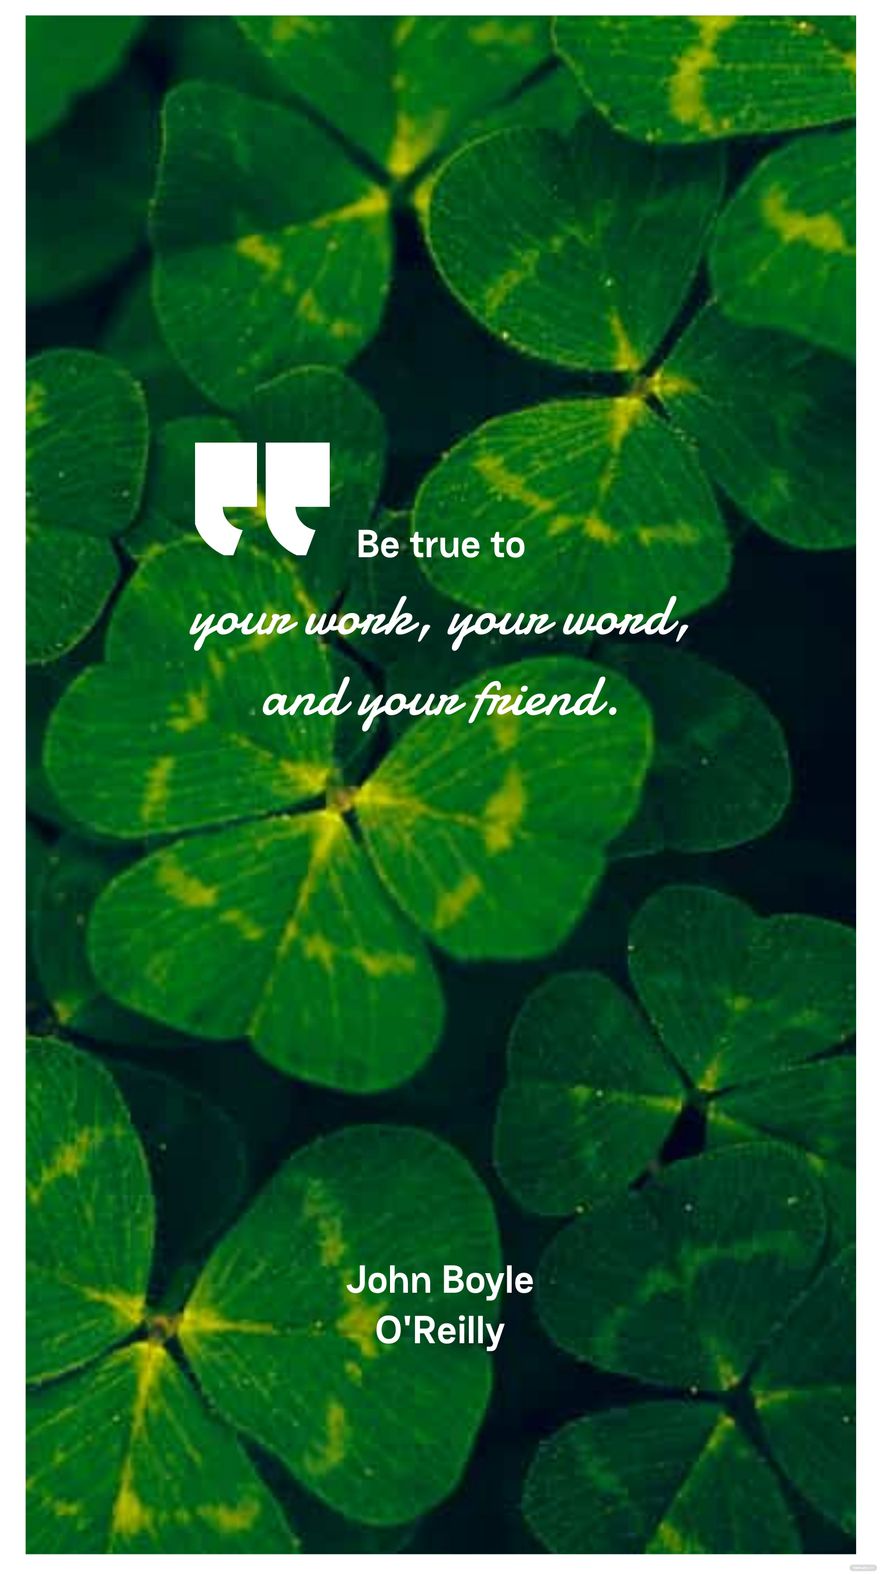 John Boyle O'Reilly - Be true to your work, your word, and your friend.